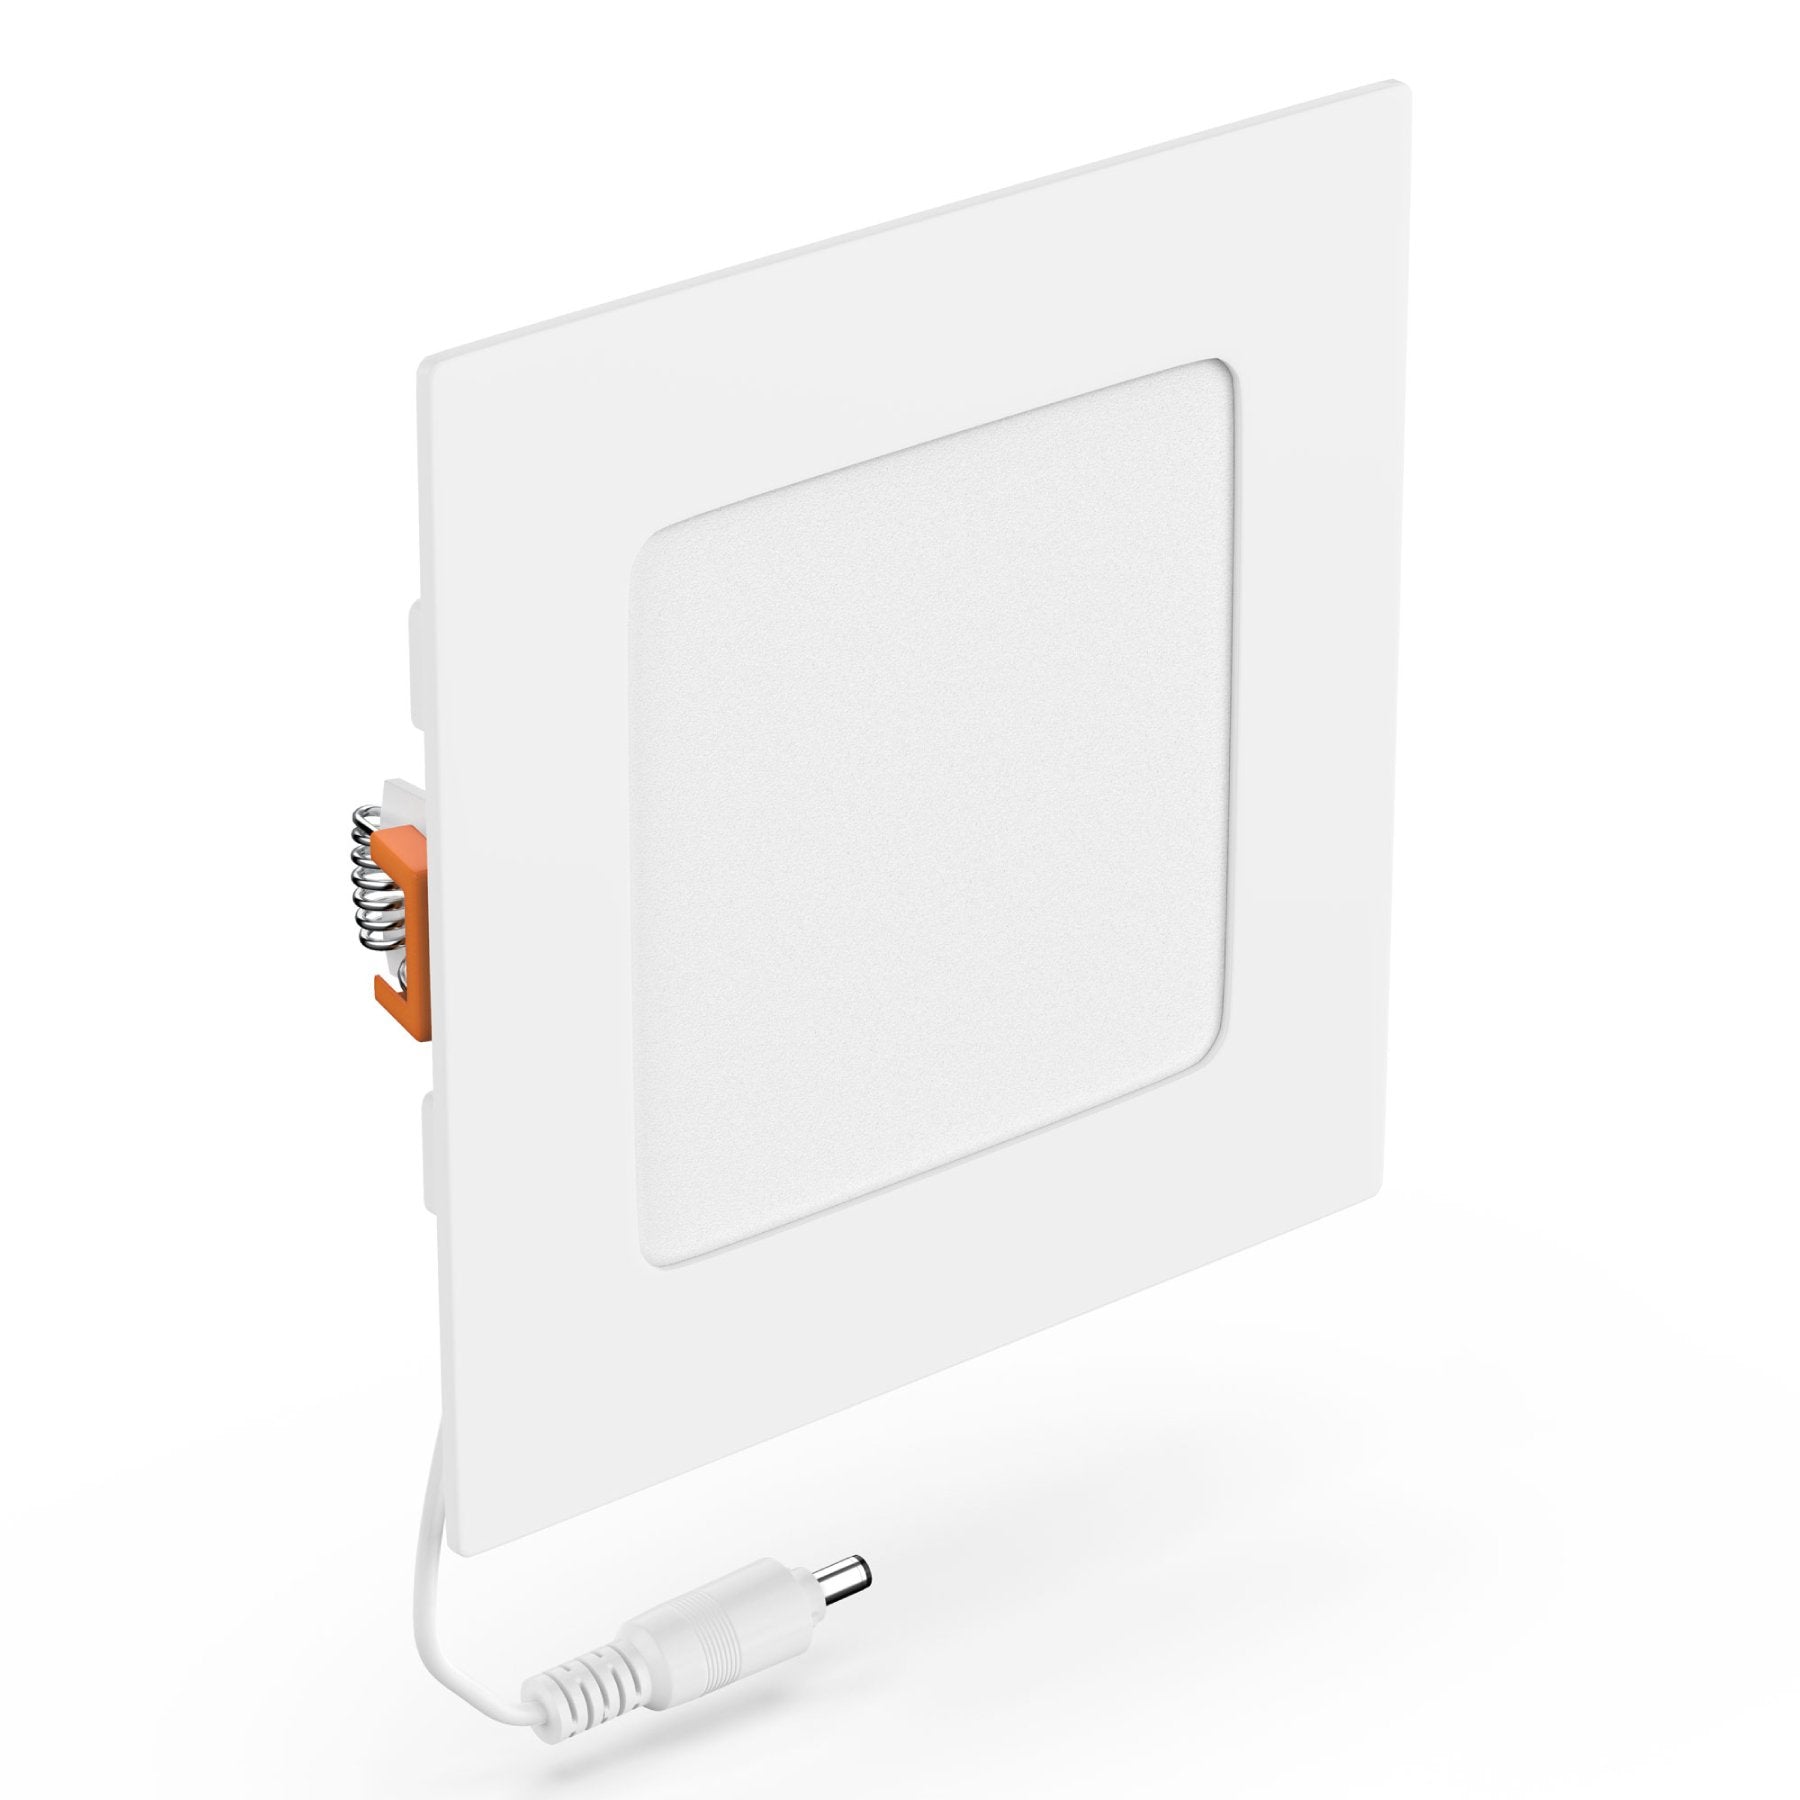 6-inch-dimmable-led-square-recessed-lighting